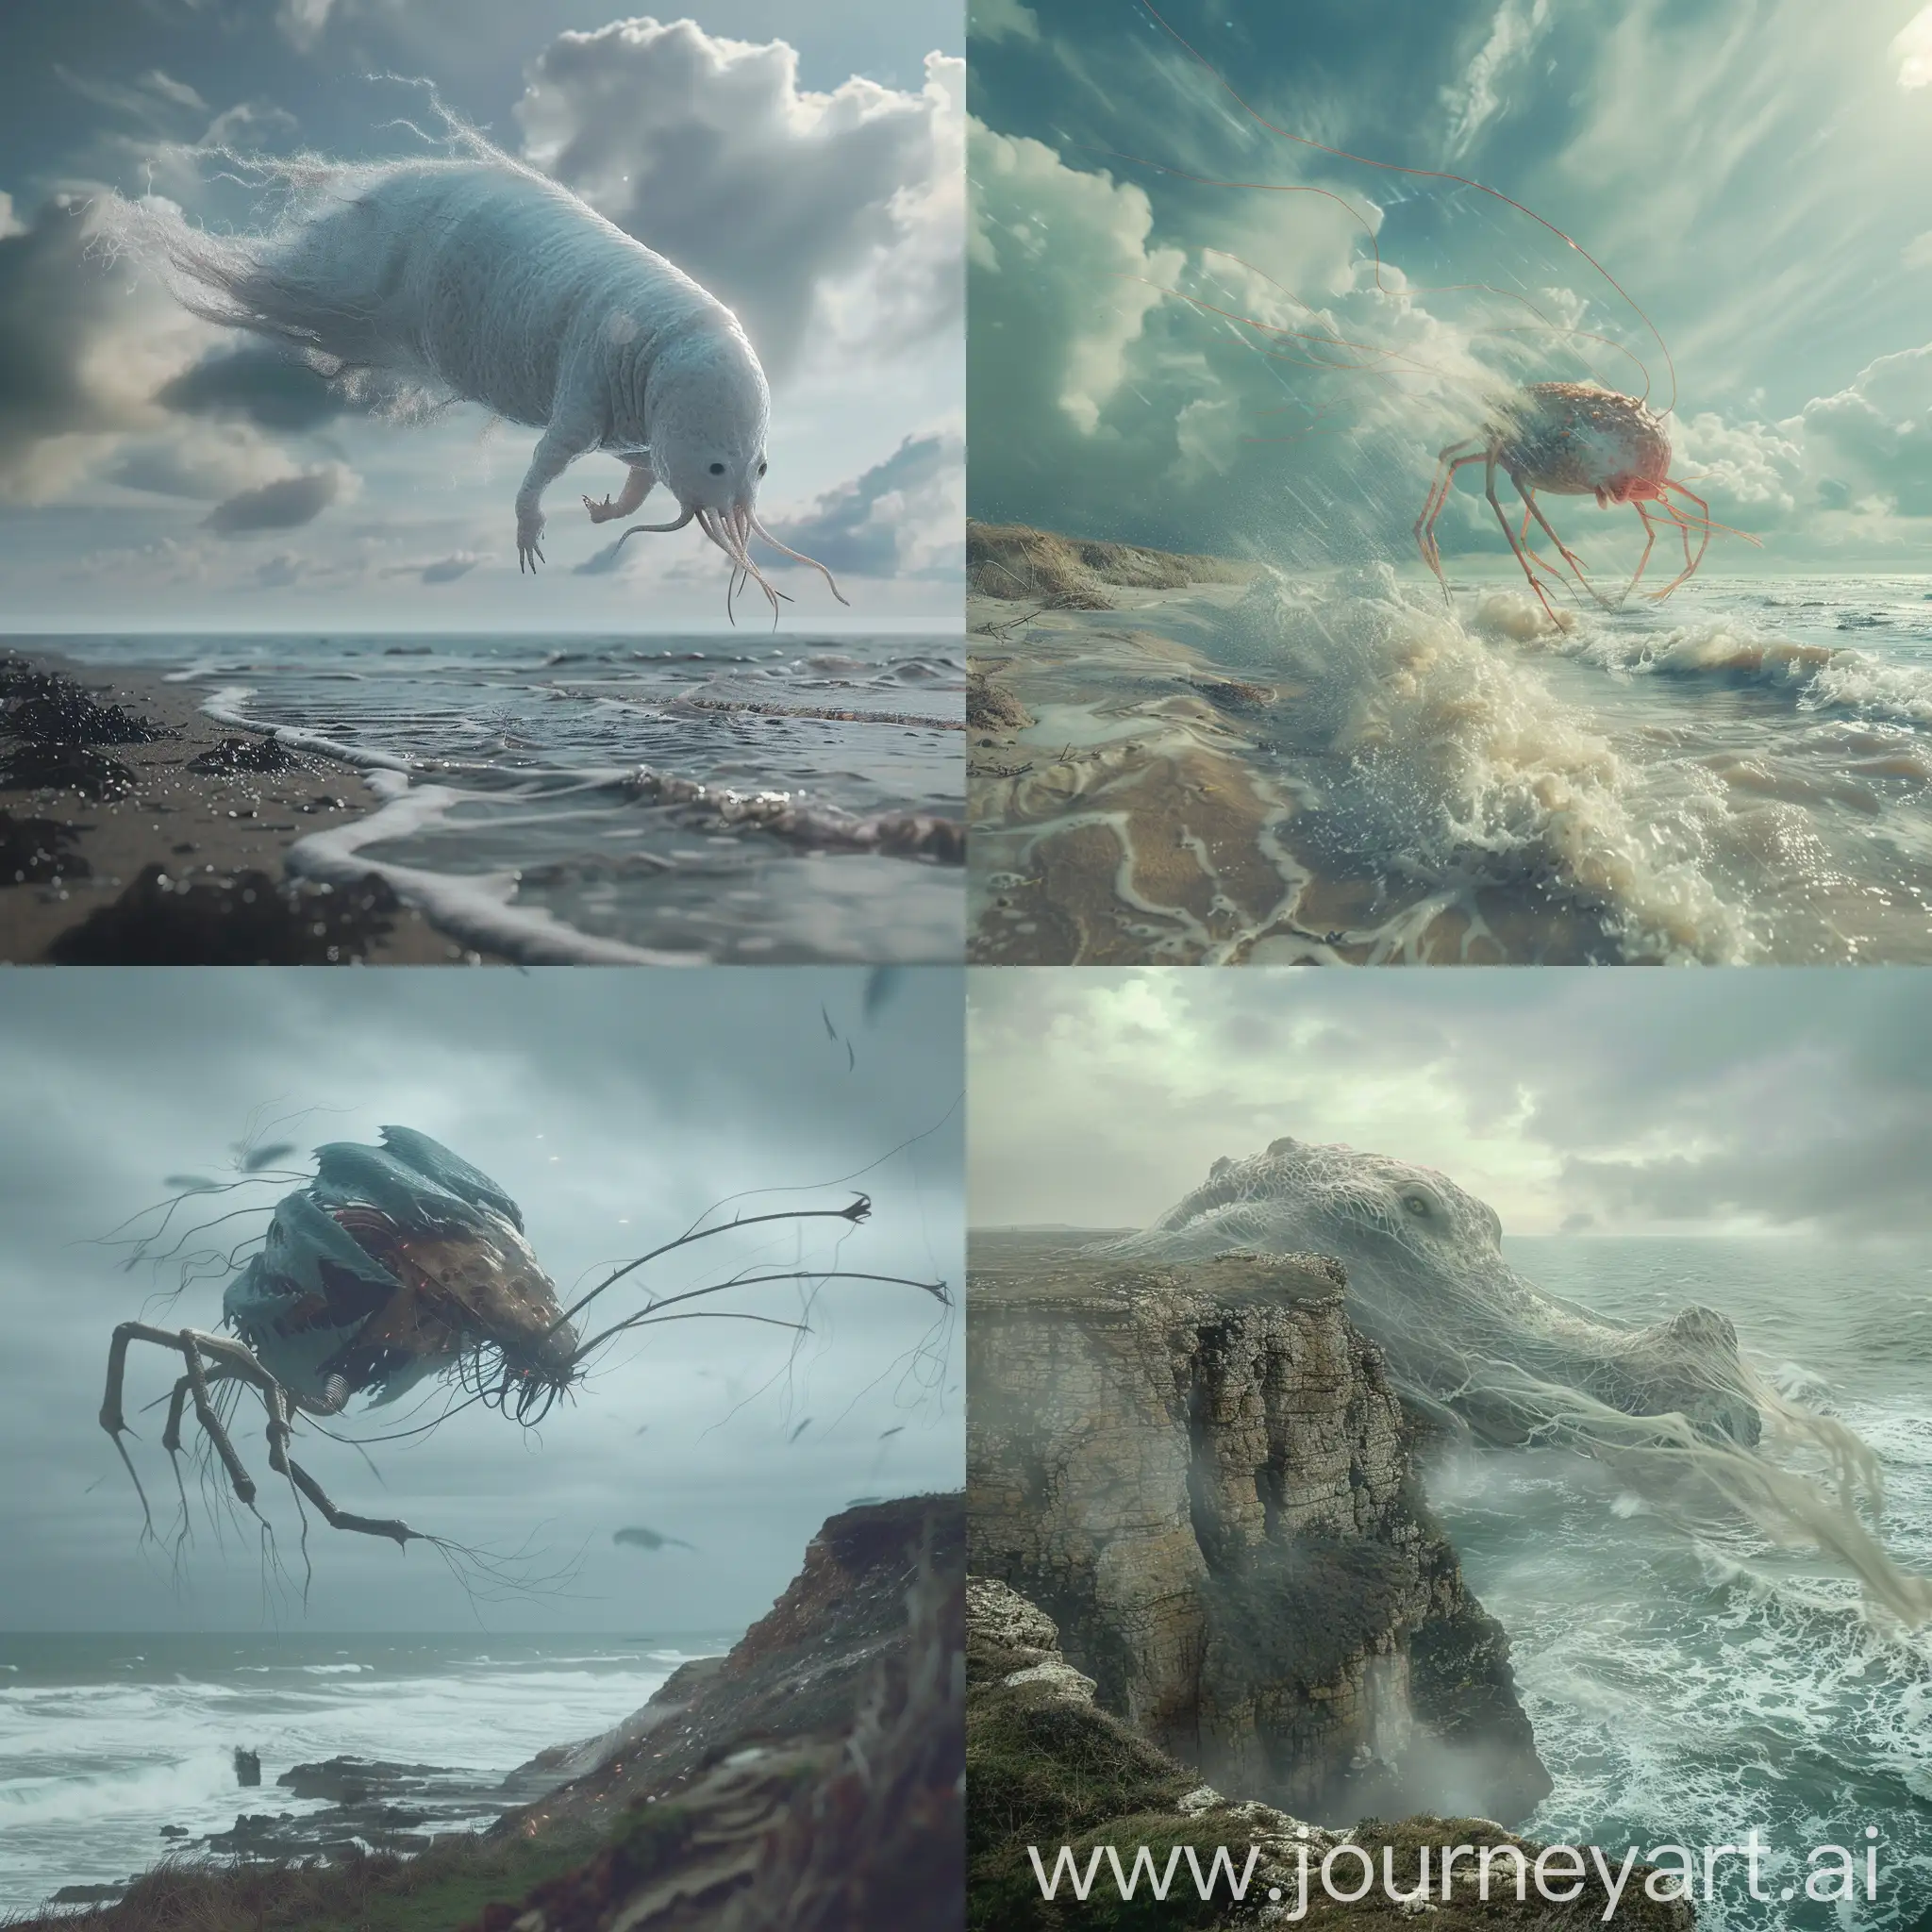 impossible creature, 8k quality, surreal place, real photo, real footage, wind and water